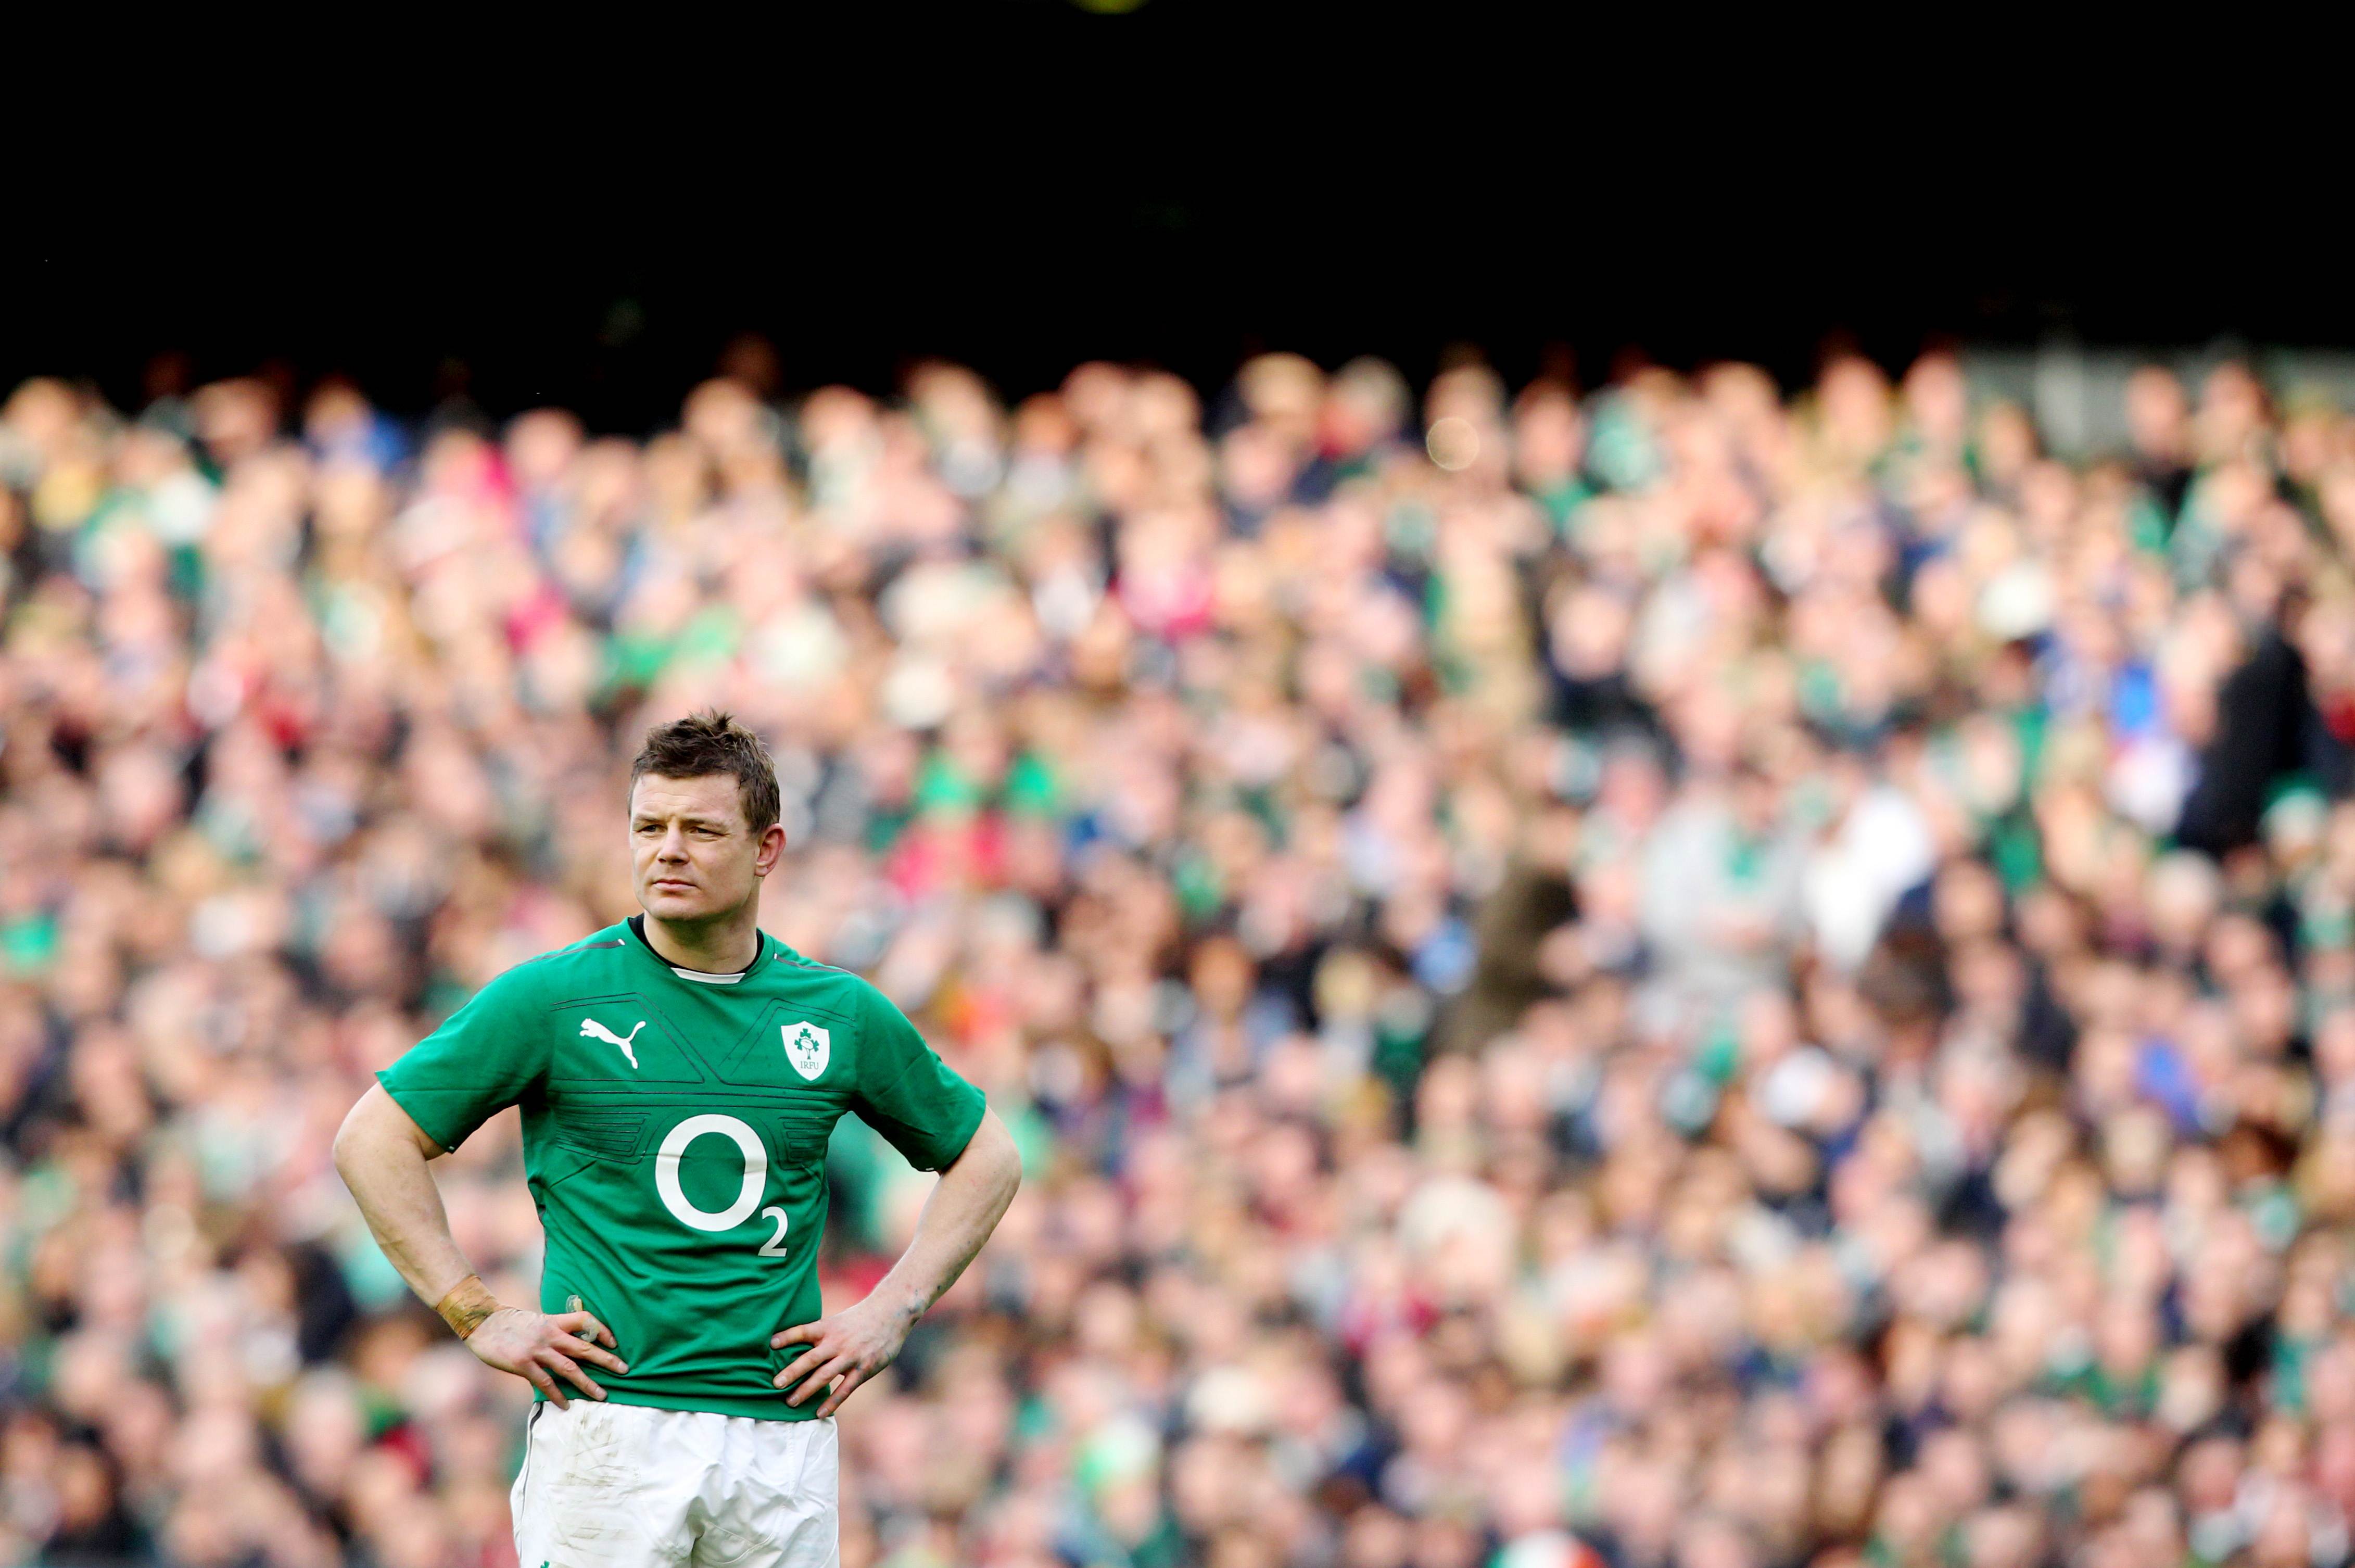 Brian O’Driscoll looks on during Ireland’s 46-7 victory over Italy in Dublin. Photo: AFP